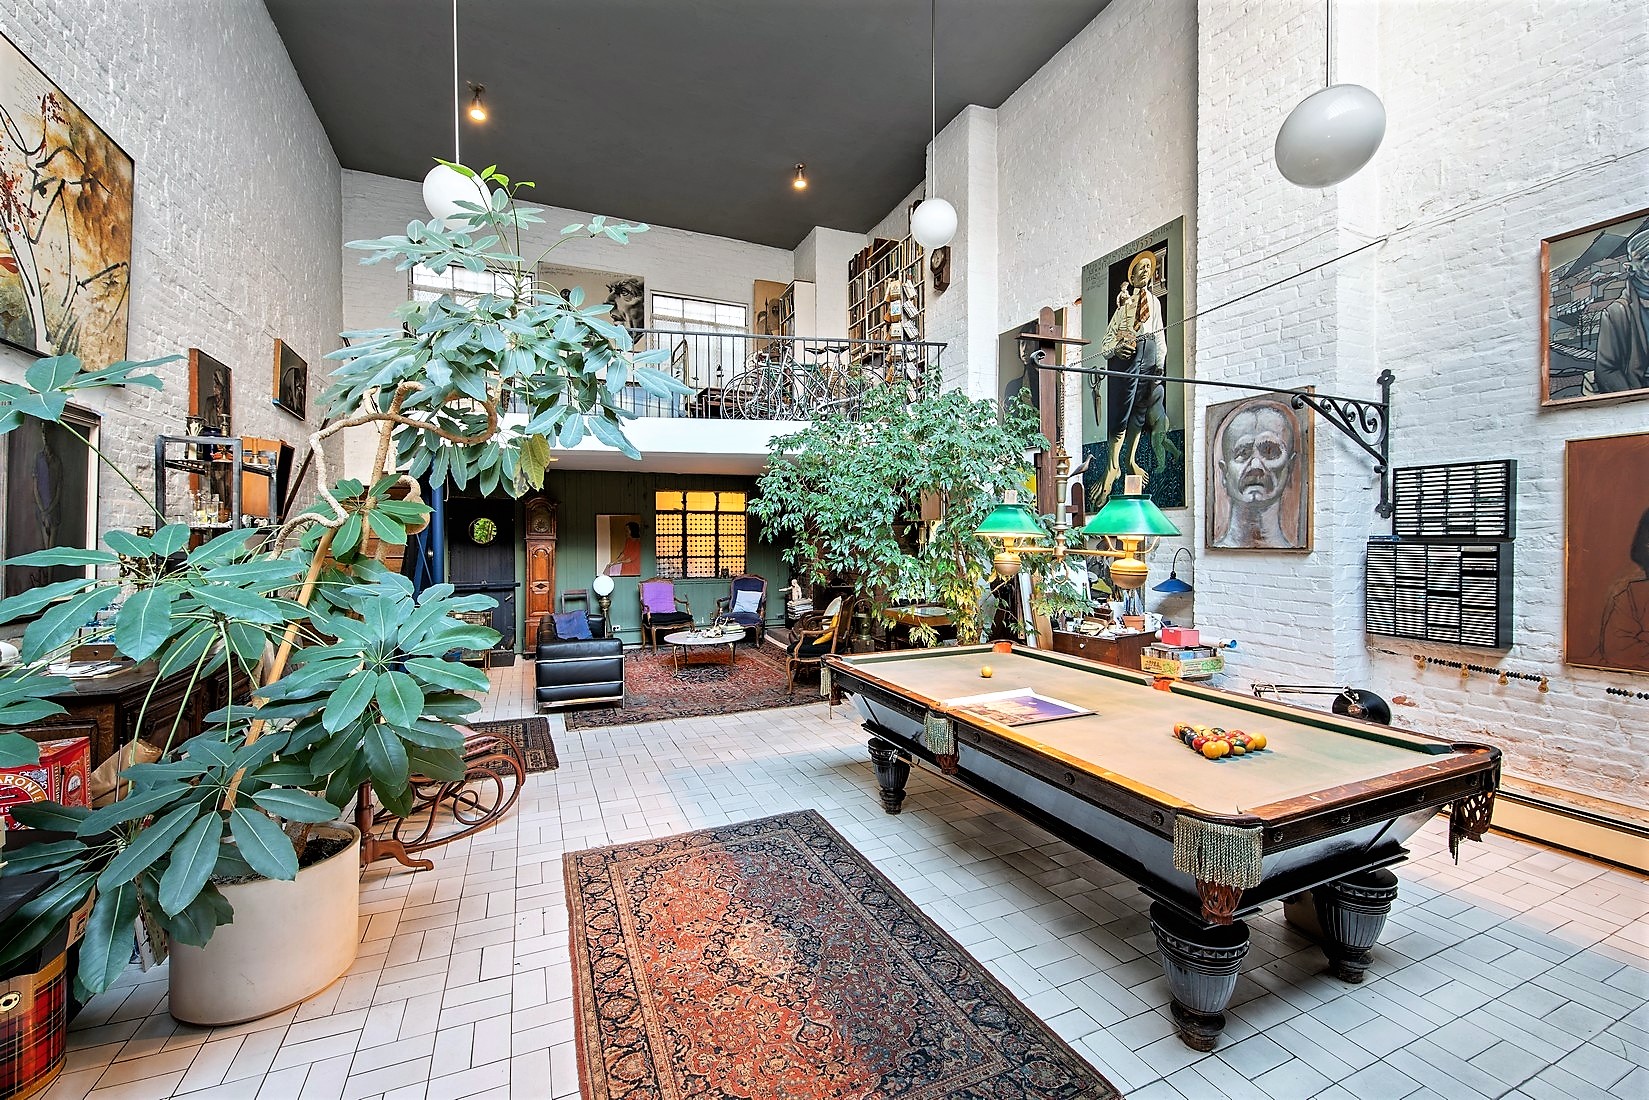 A open living area with 20-foot ceilings, a pool table, and a large skylight.